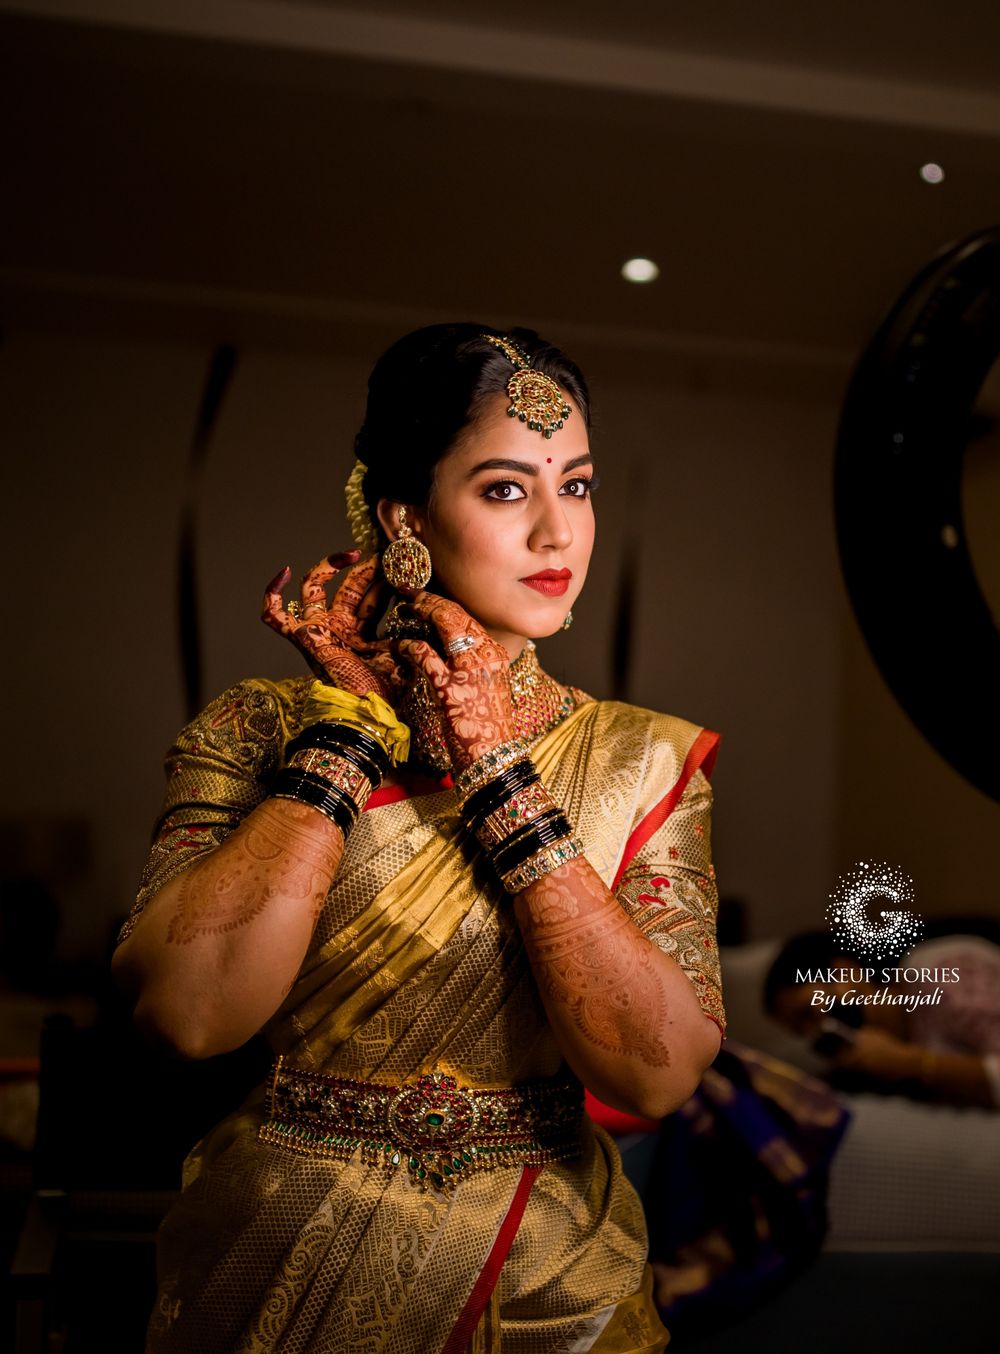 Photo of Soith indian bride getting ready shot